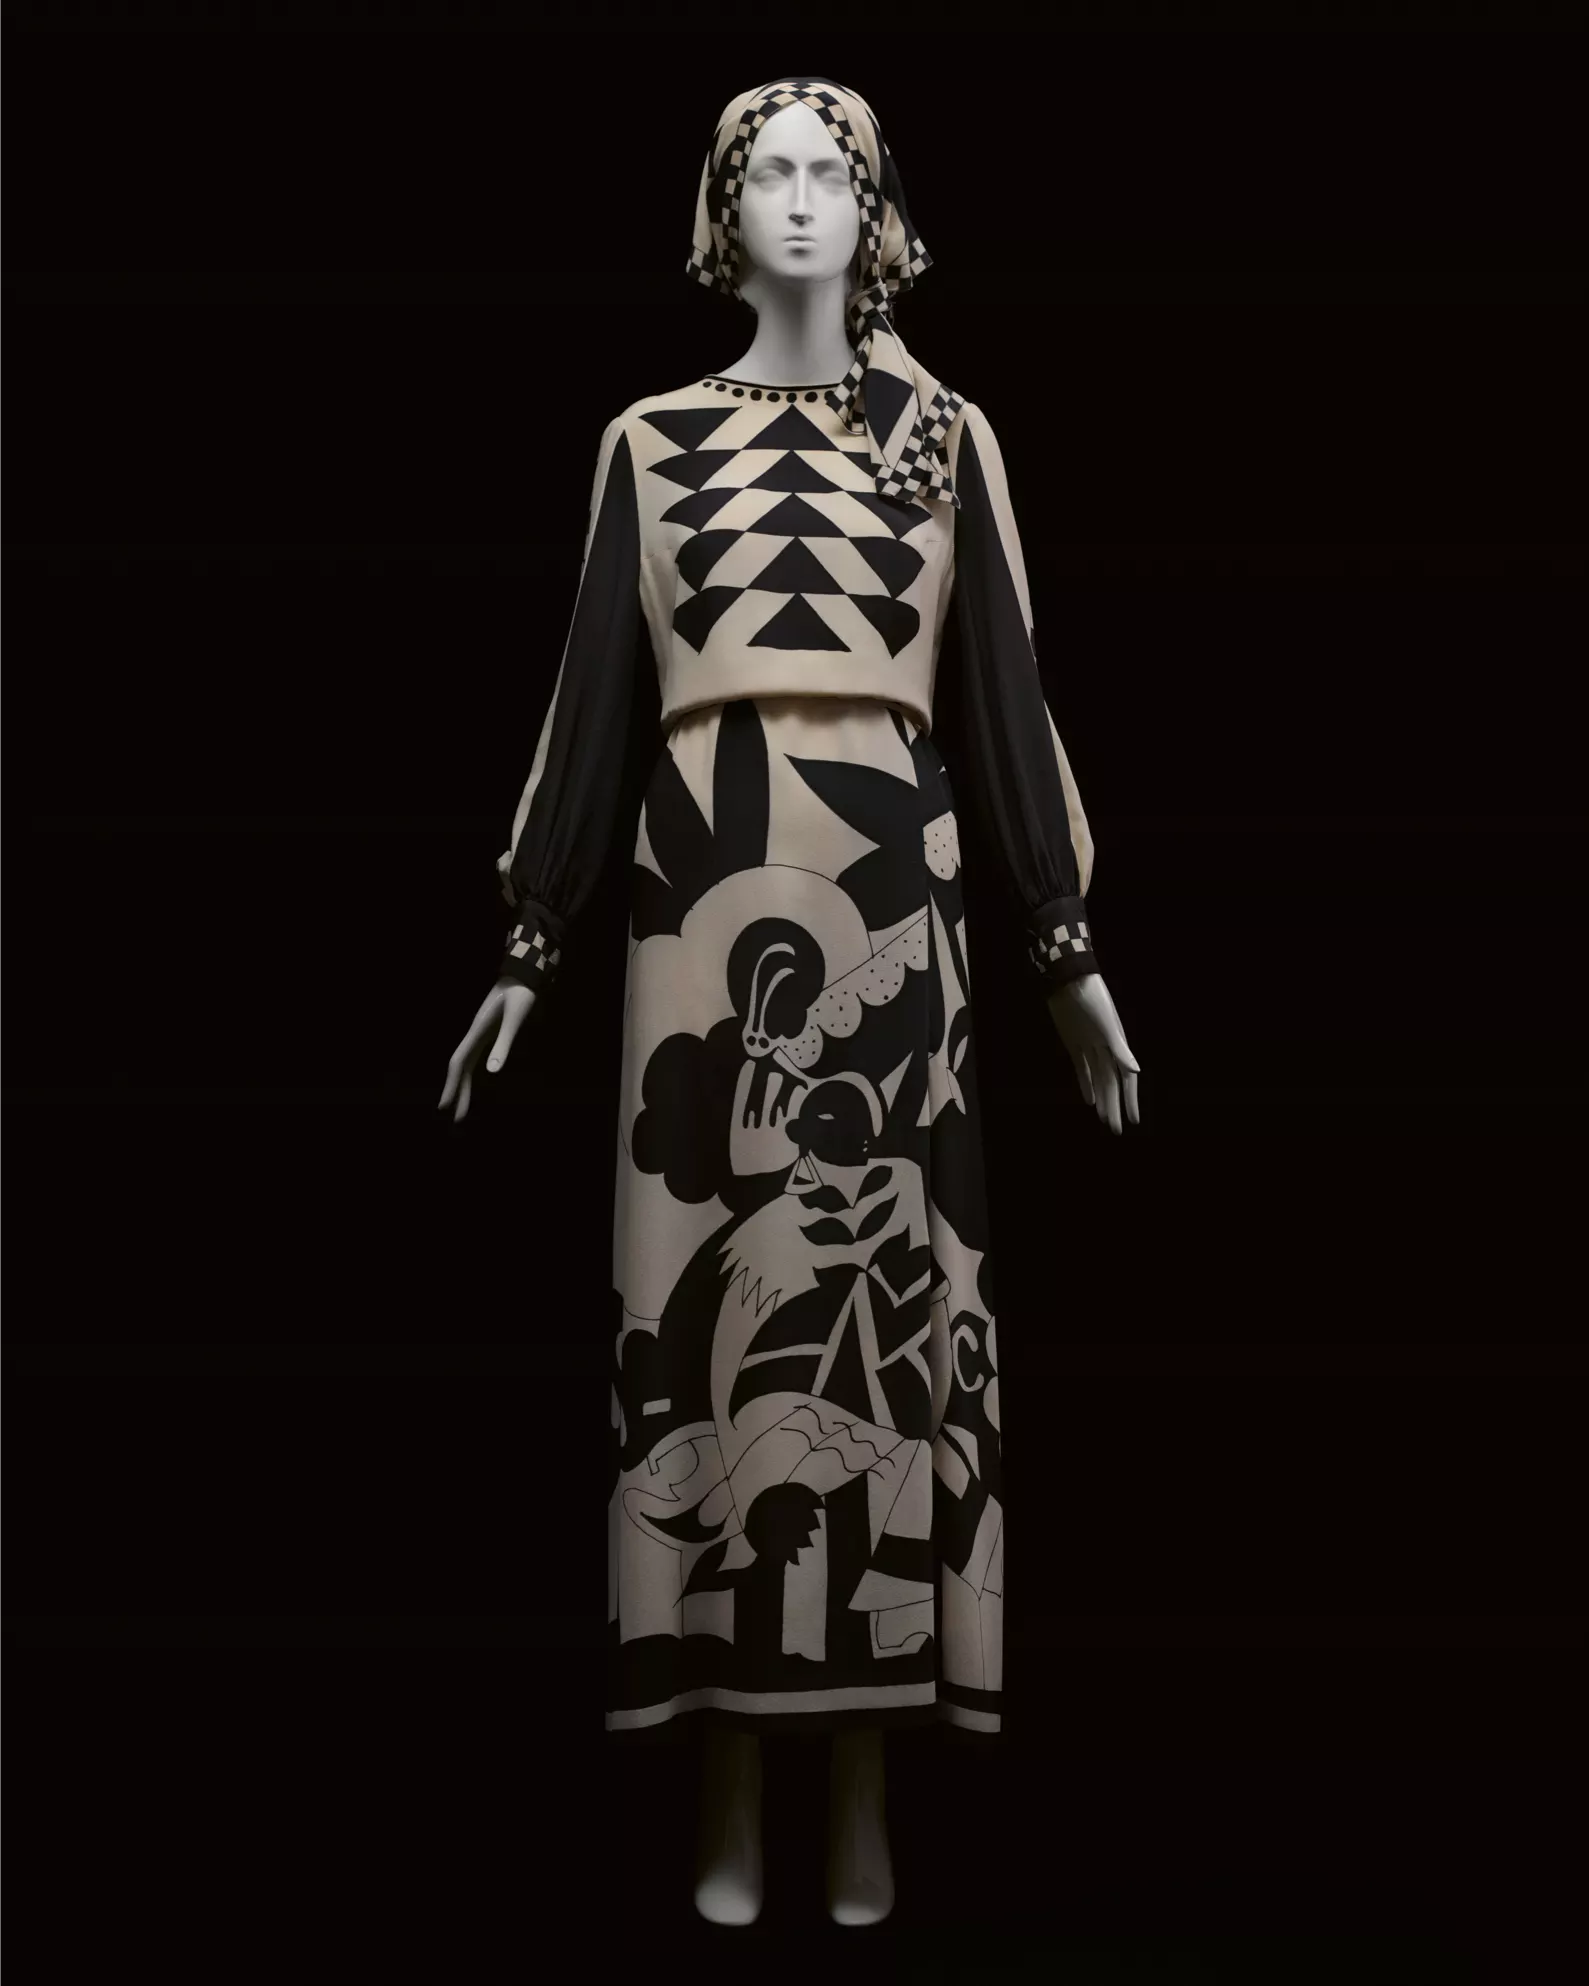 mannequin dressed in black and white karl lagerfeld dress and head scarf